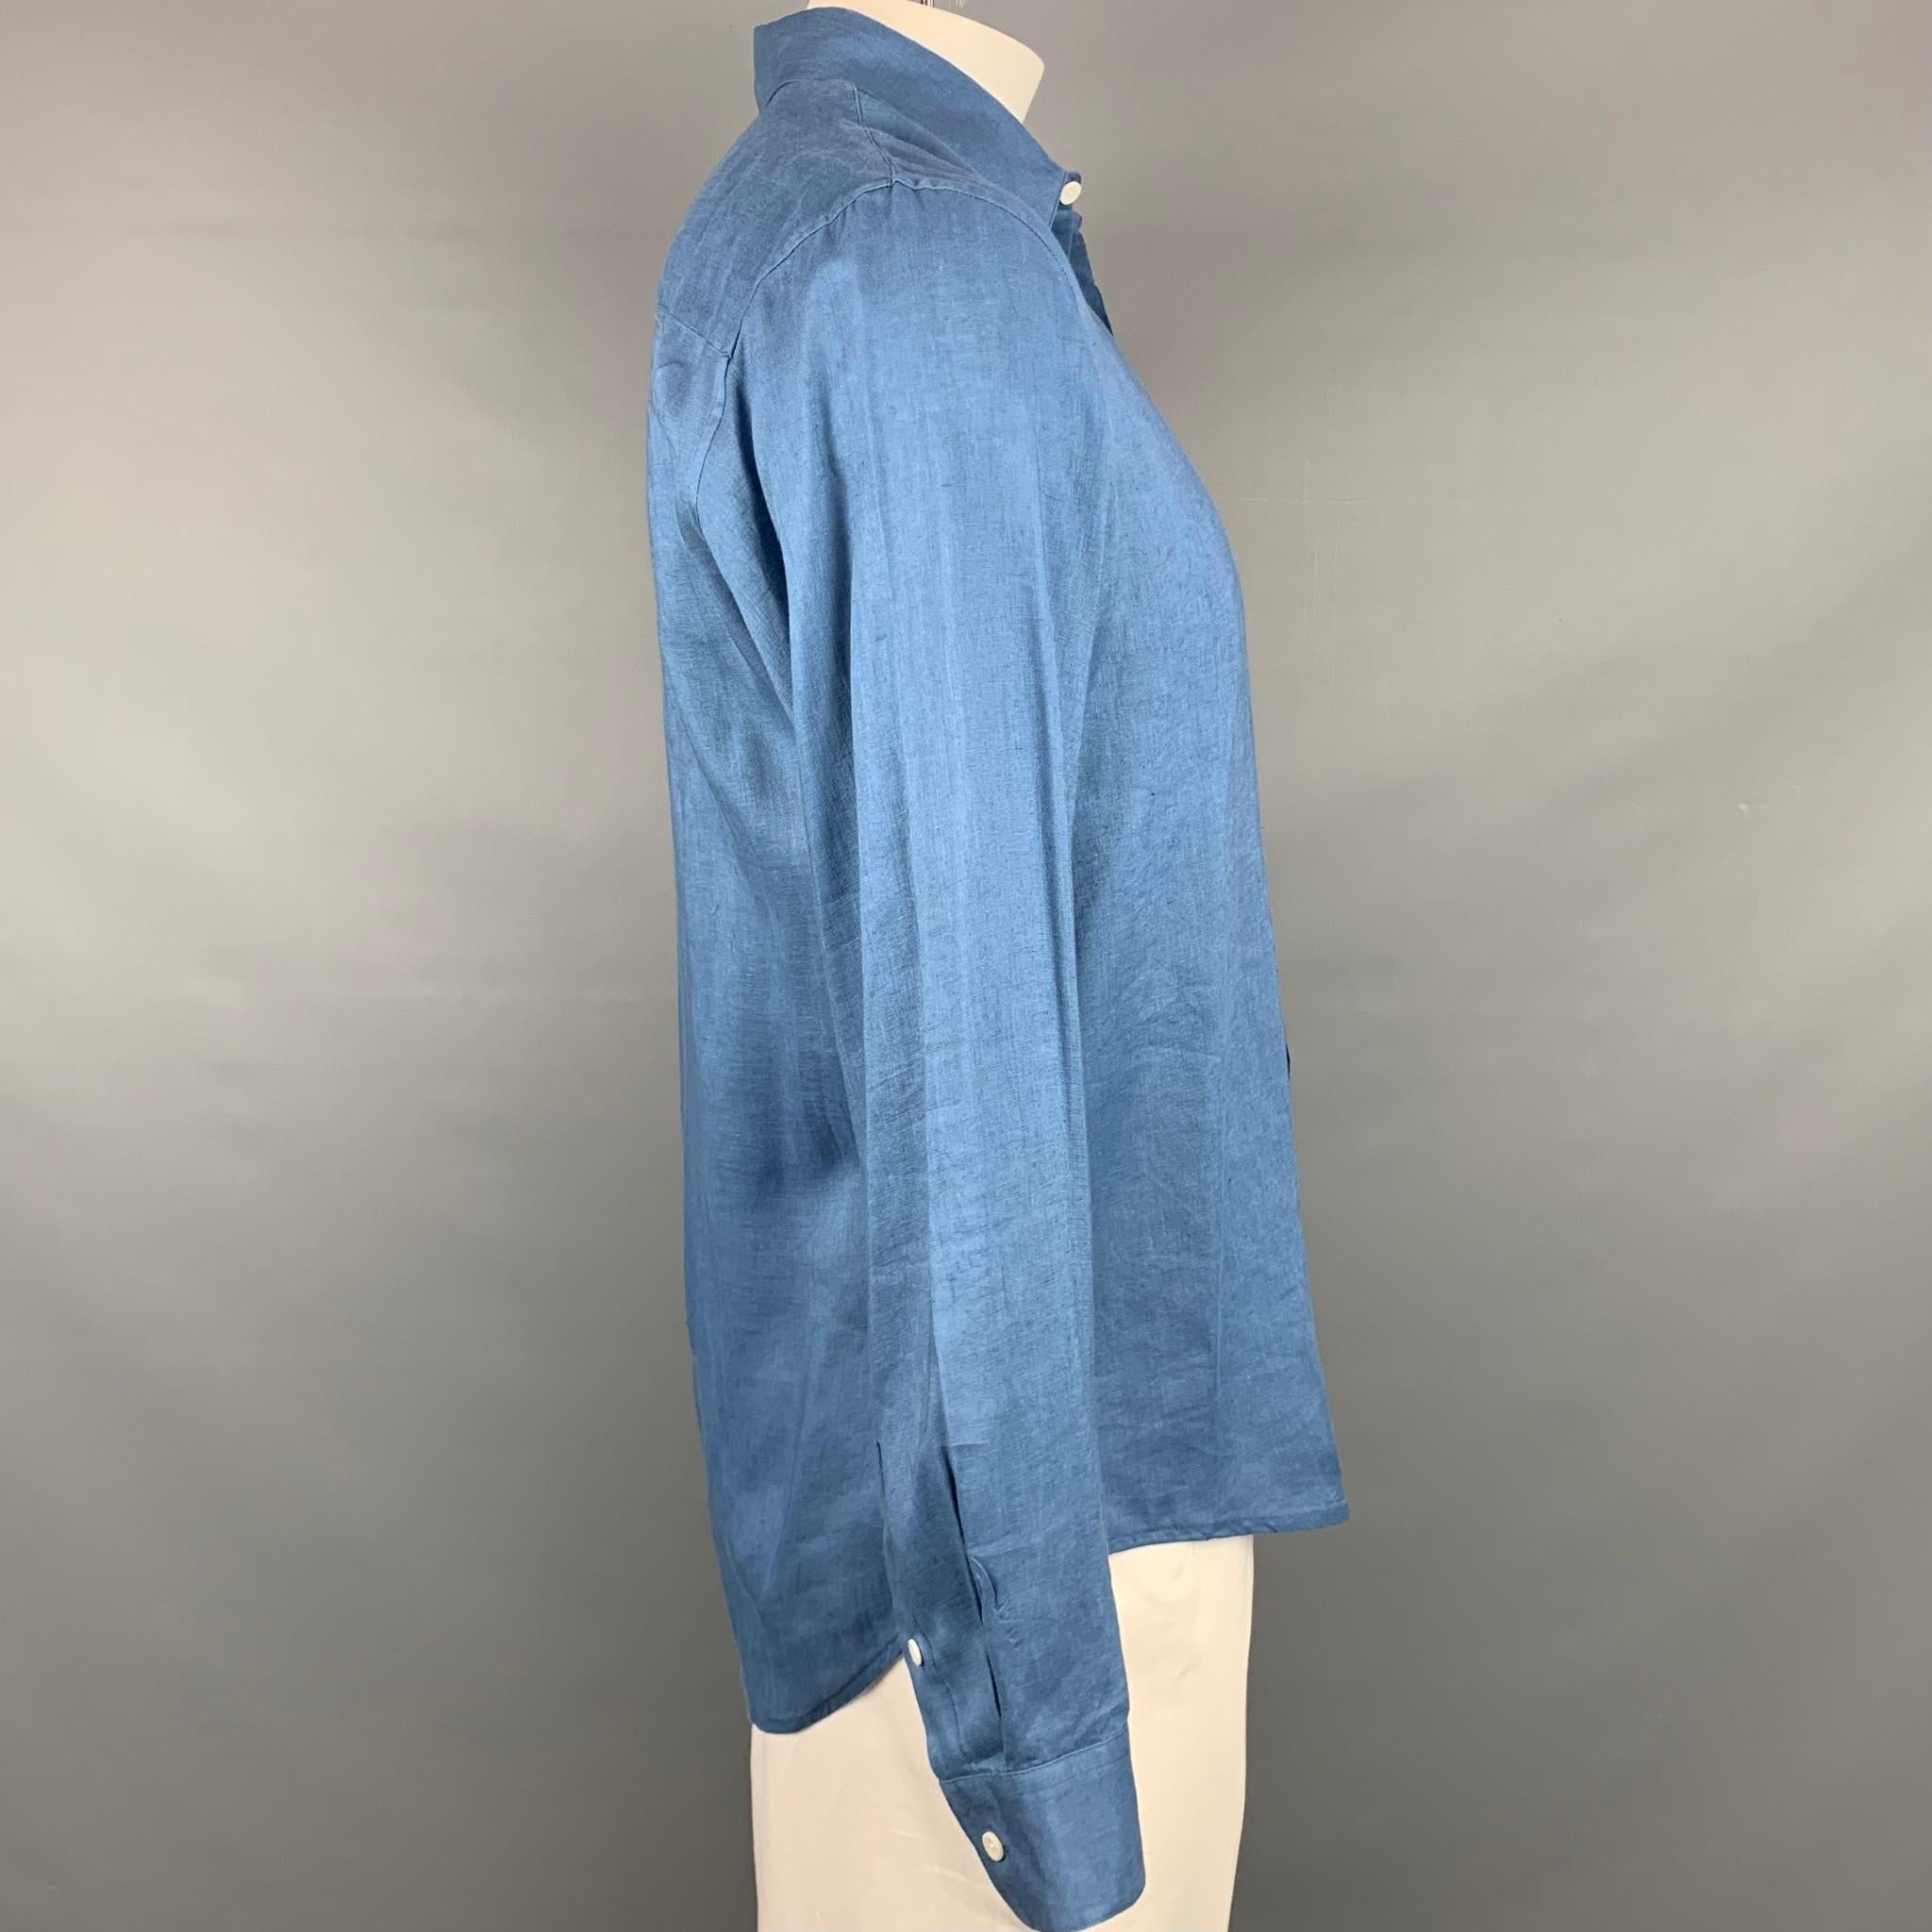 SANDRO long sleeve shirt comes in a blue linen featuring a classic fit, button up, and a spread collar. 

Very Good Pre-Owned Condition.
Marked: XL
Original Retail Price: $220.00

Measurements:

Shoulder: 19 in.
Chest: 44 in.
Sleeve: 26.5